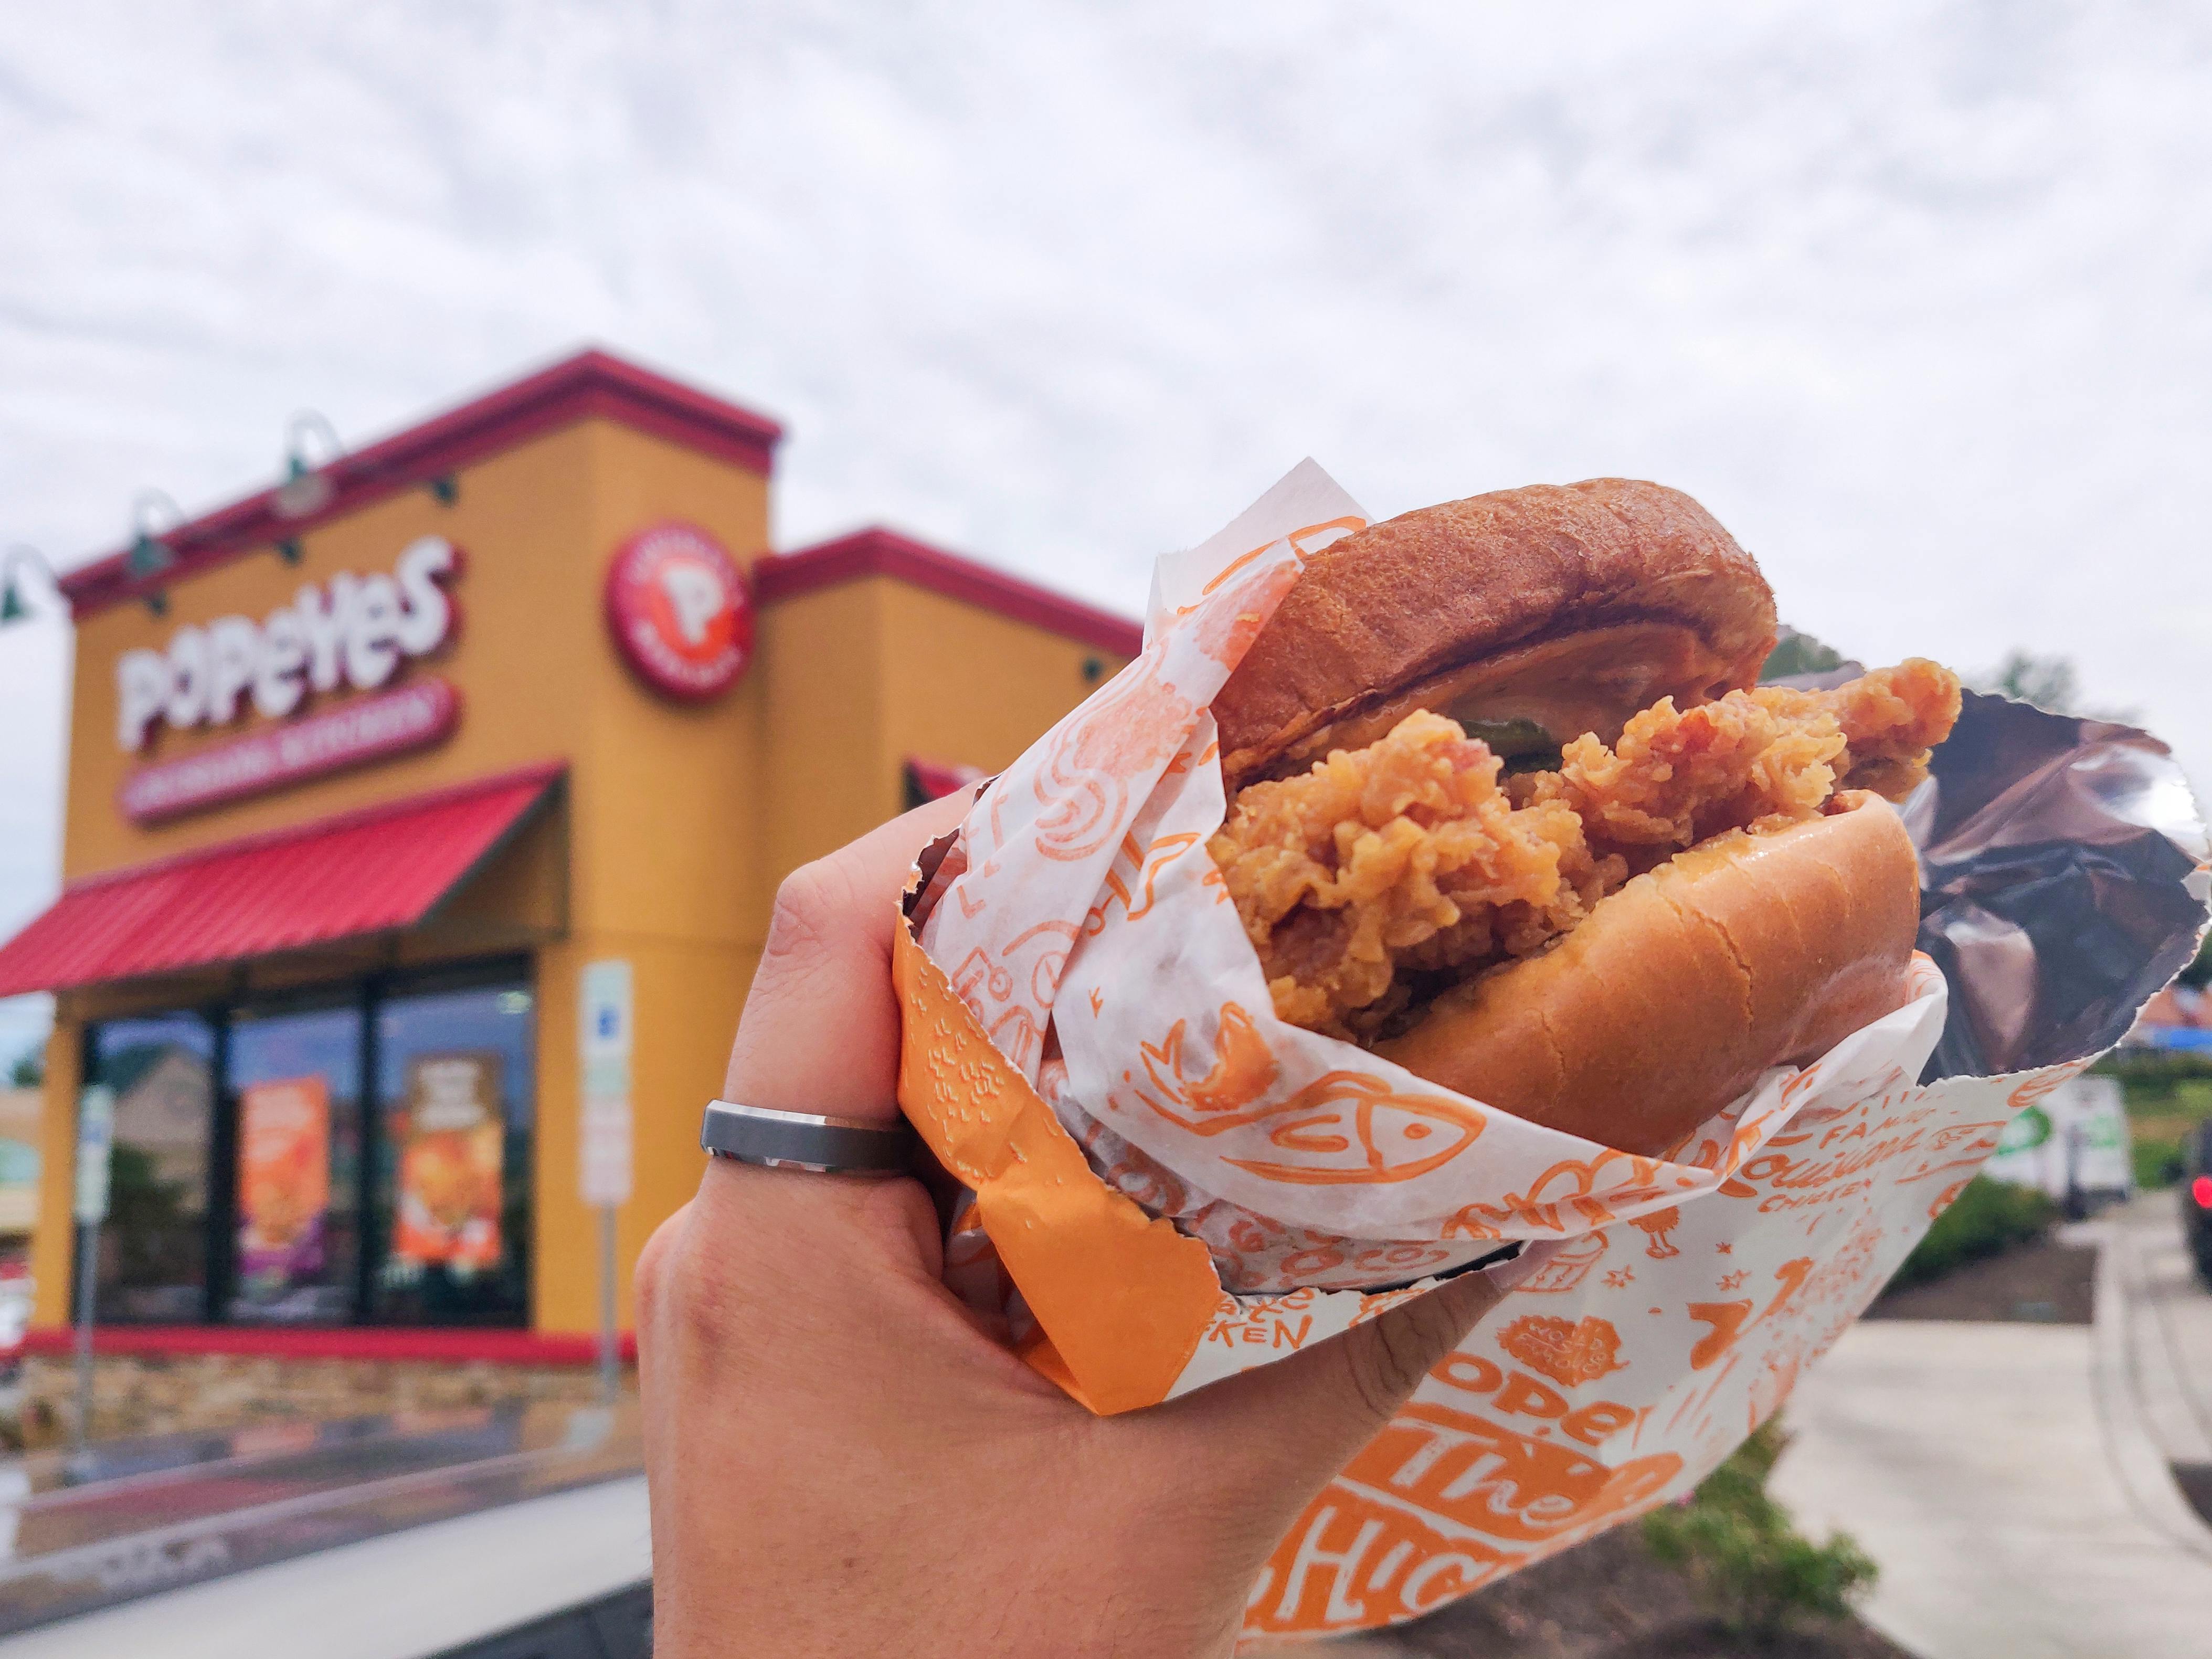 A person's hand holding a Popeyes chicken sandwich with a Popeyes restaurant in the background.